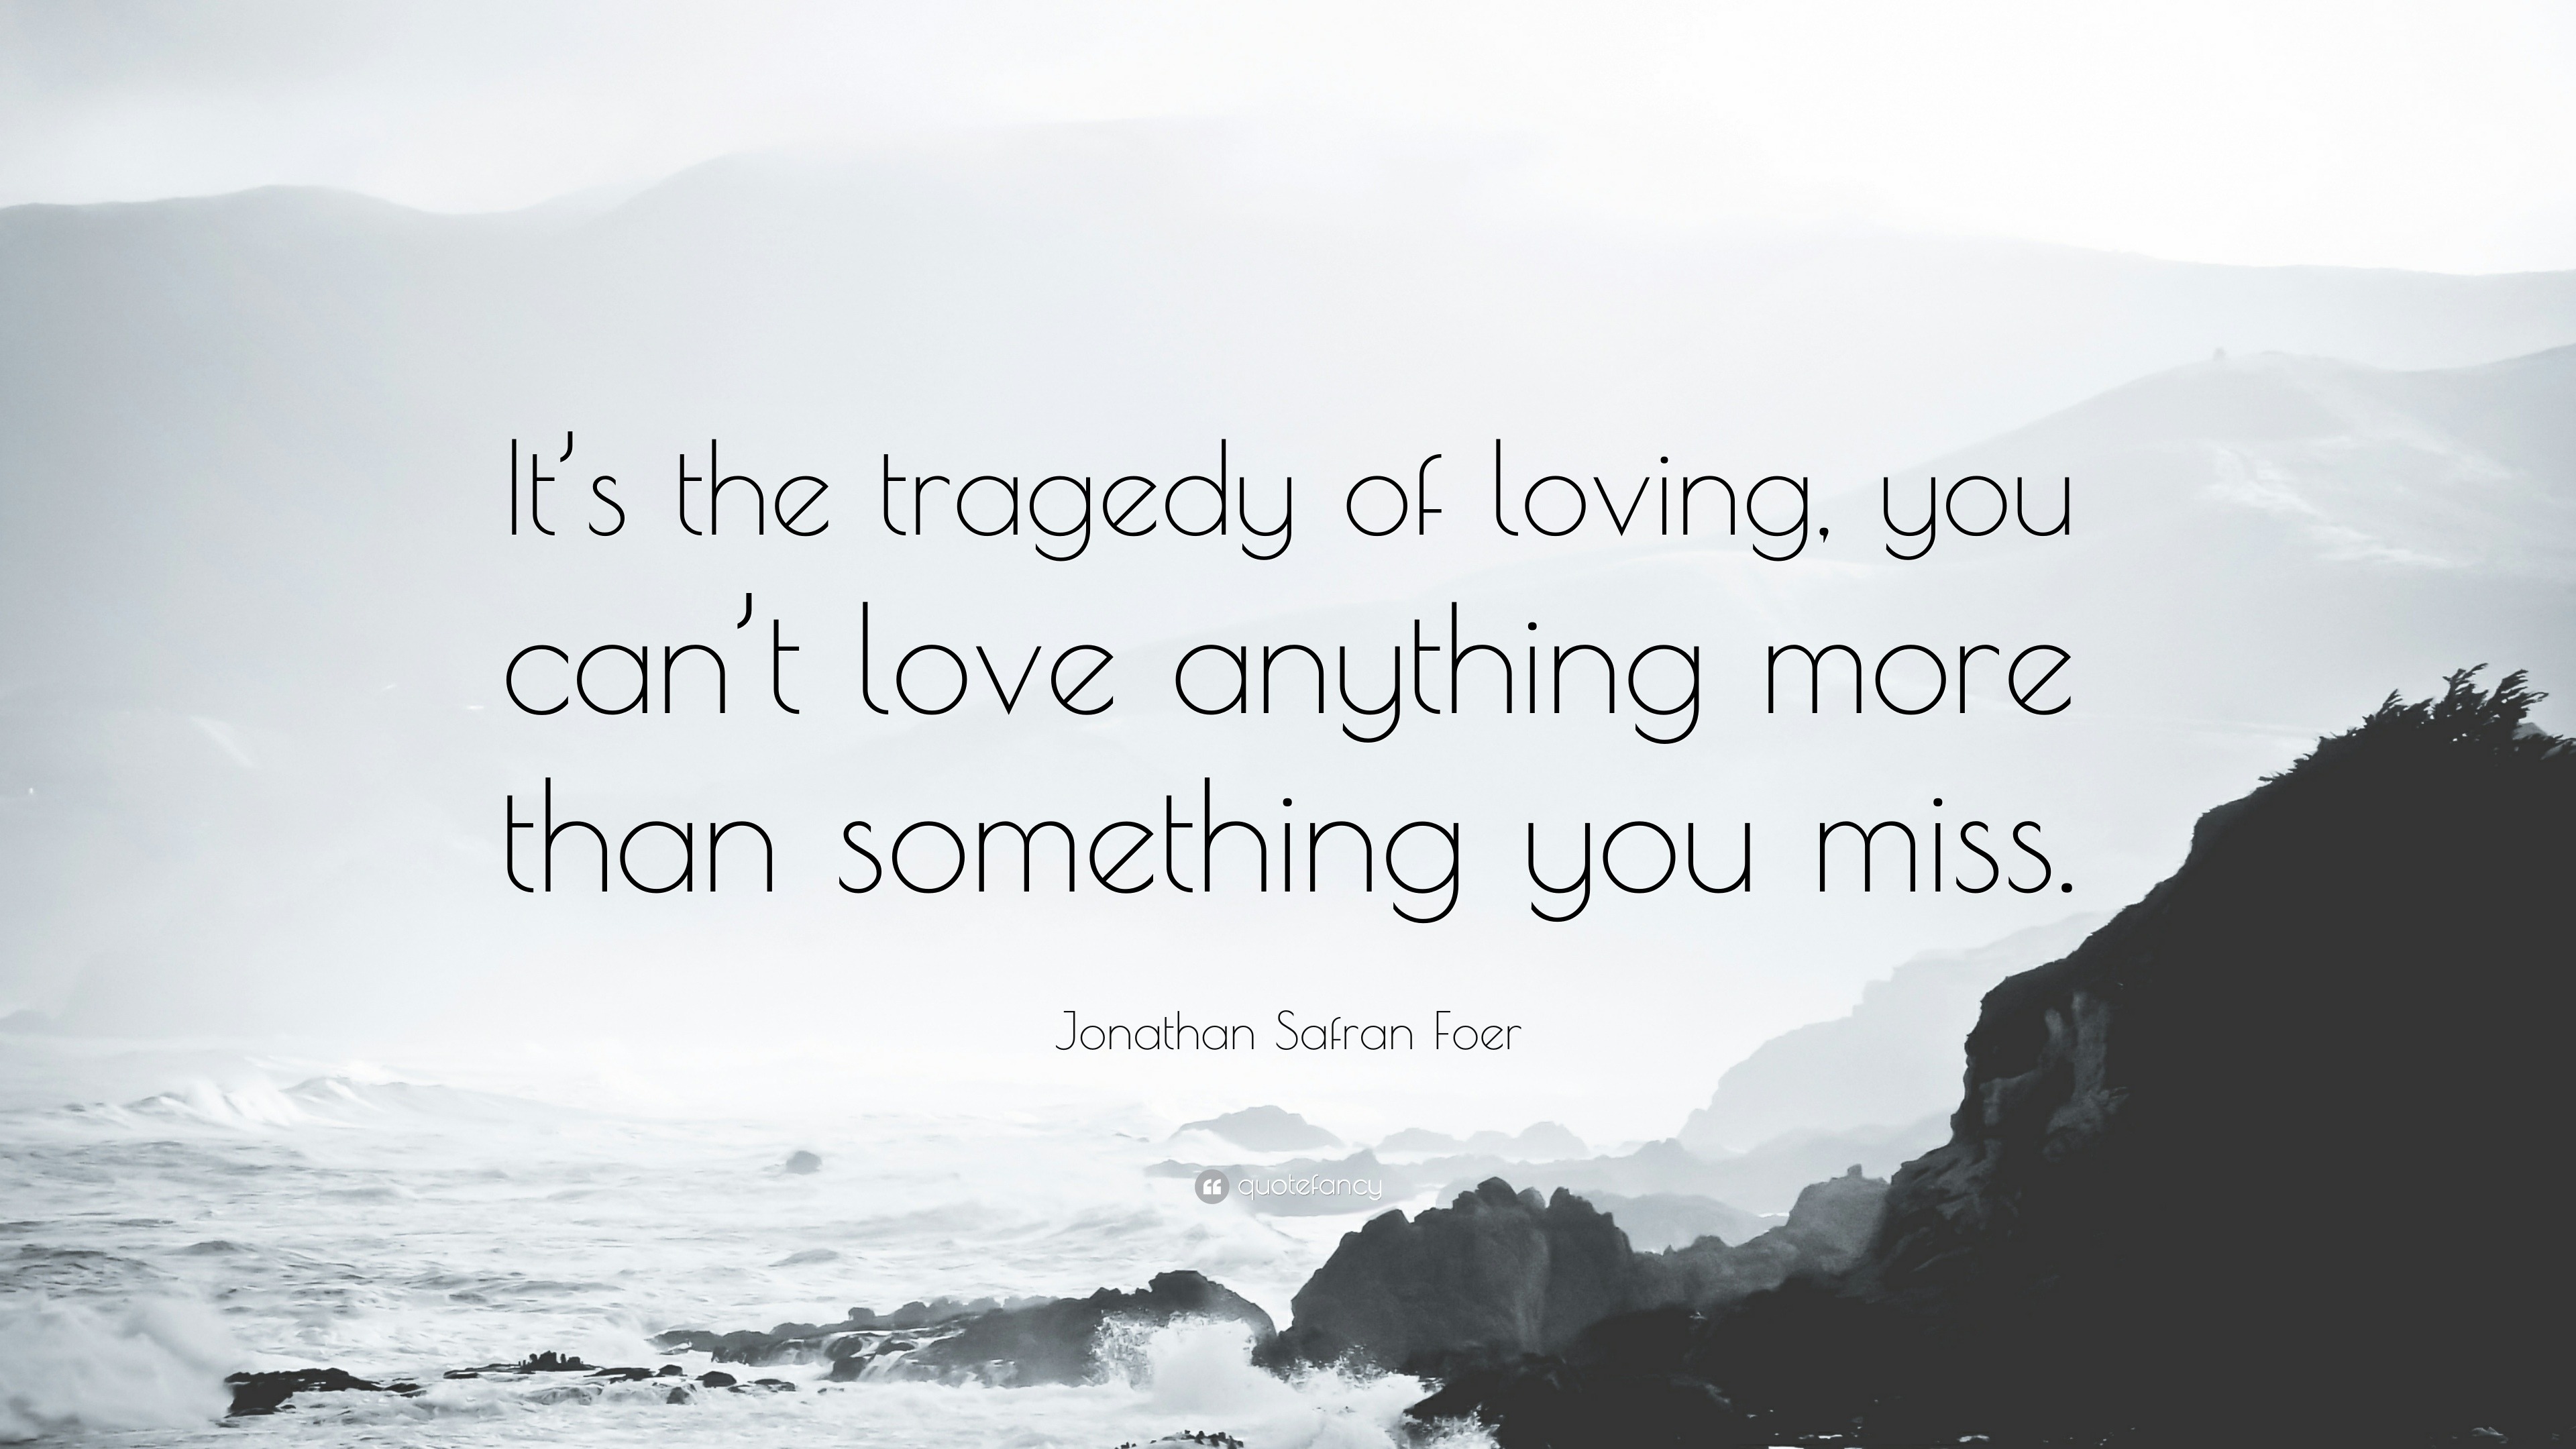 Jonathan Safran Foer Quote “It s the tragedy of loving you can t